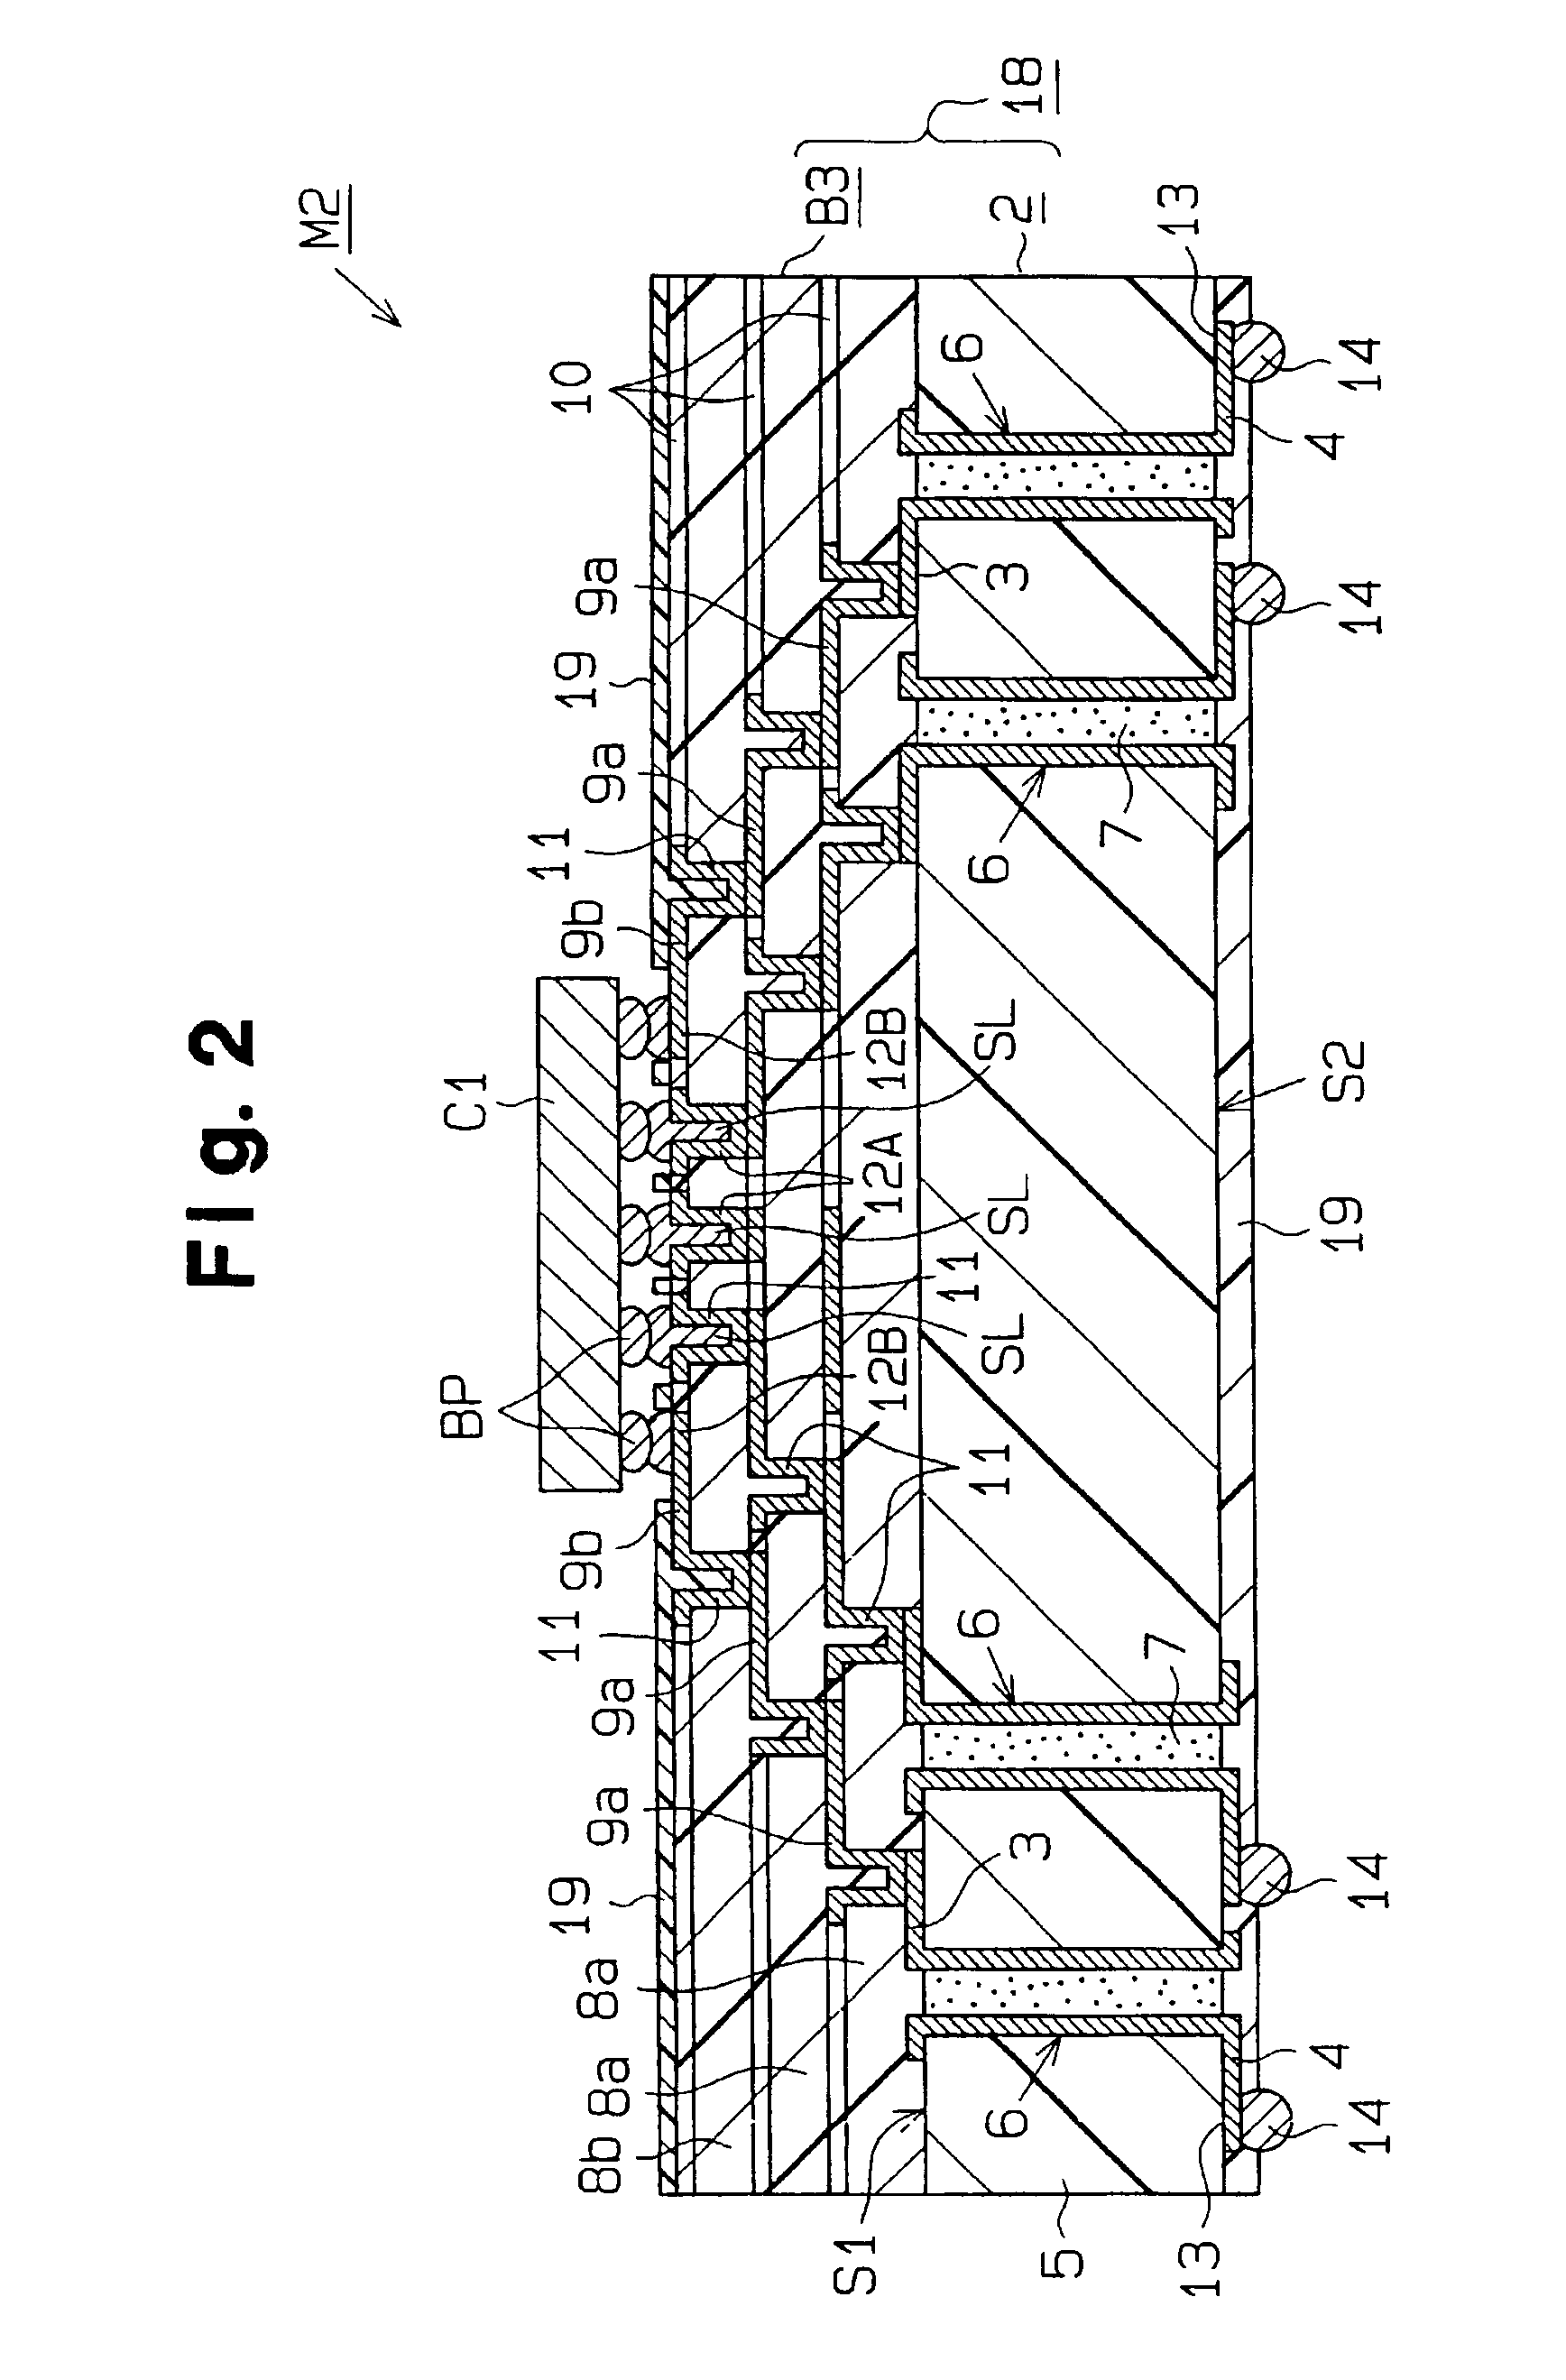 Circuit board for mounting electronic parts